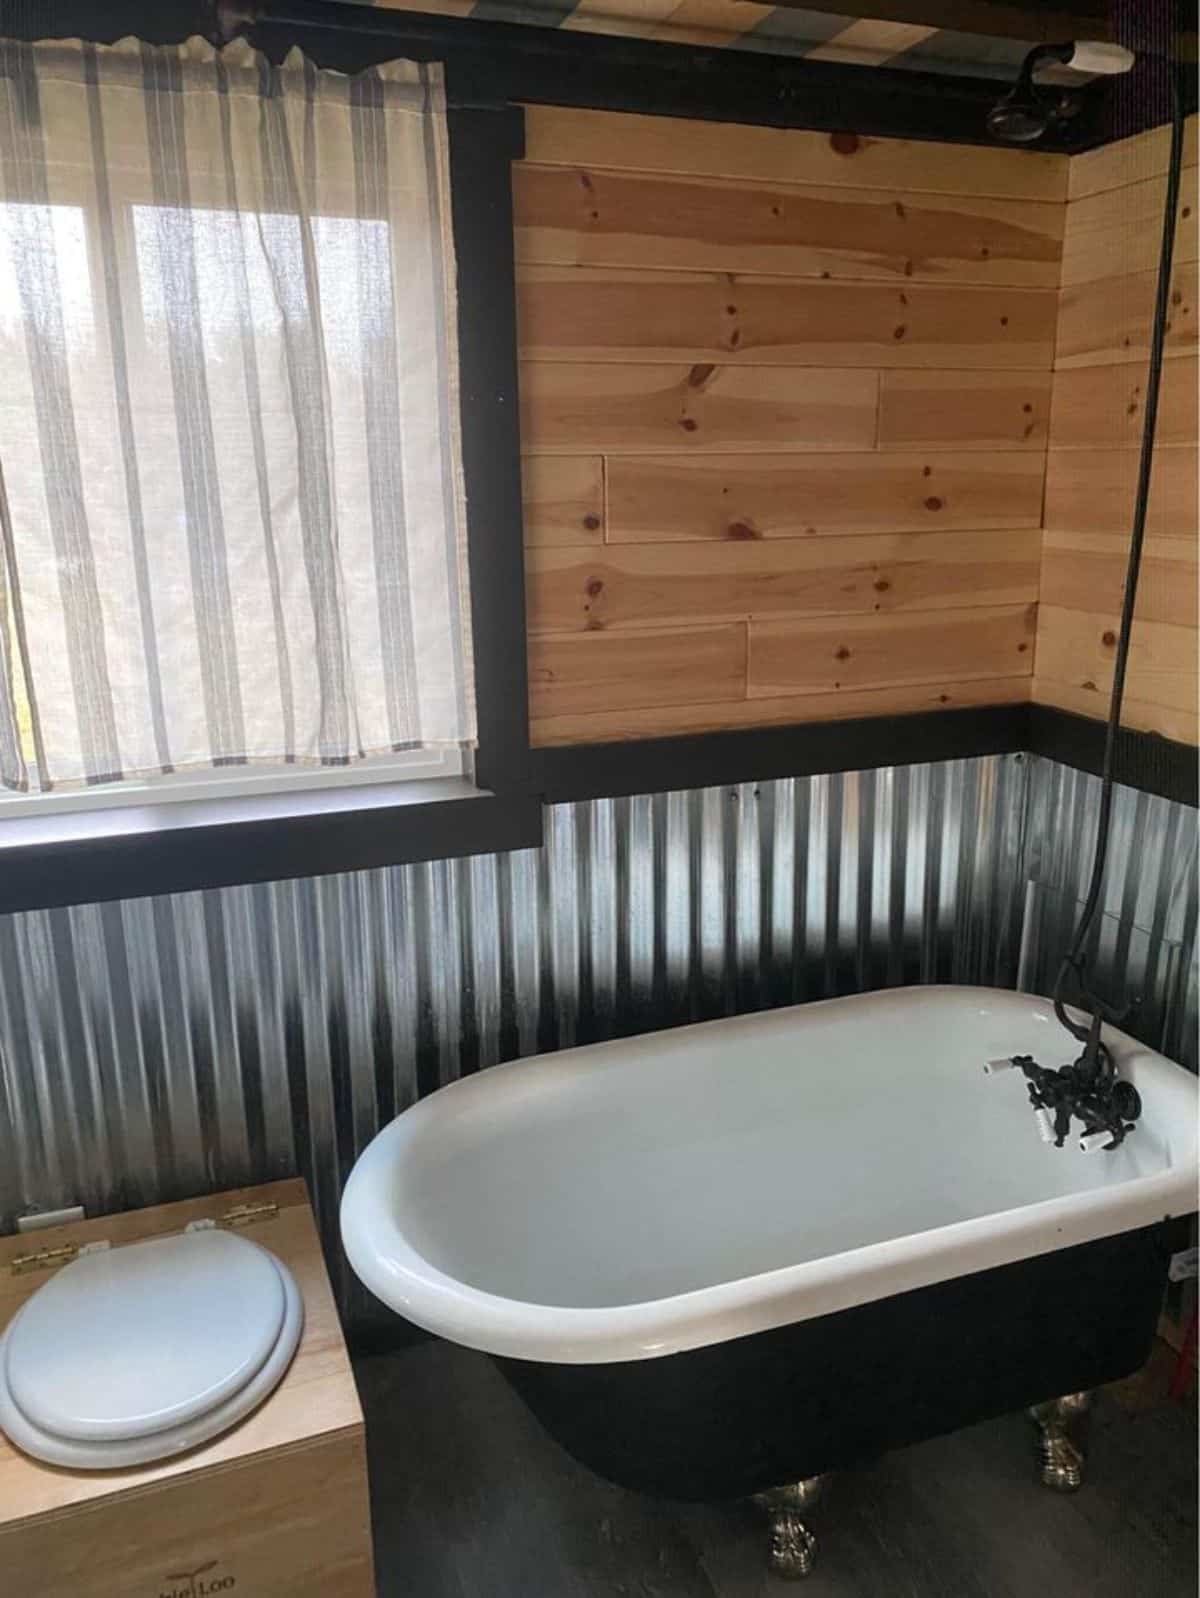 Claw foot tub in bathroom of 24' Cozy Tiny House